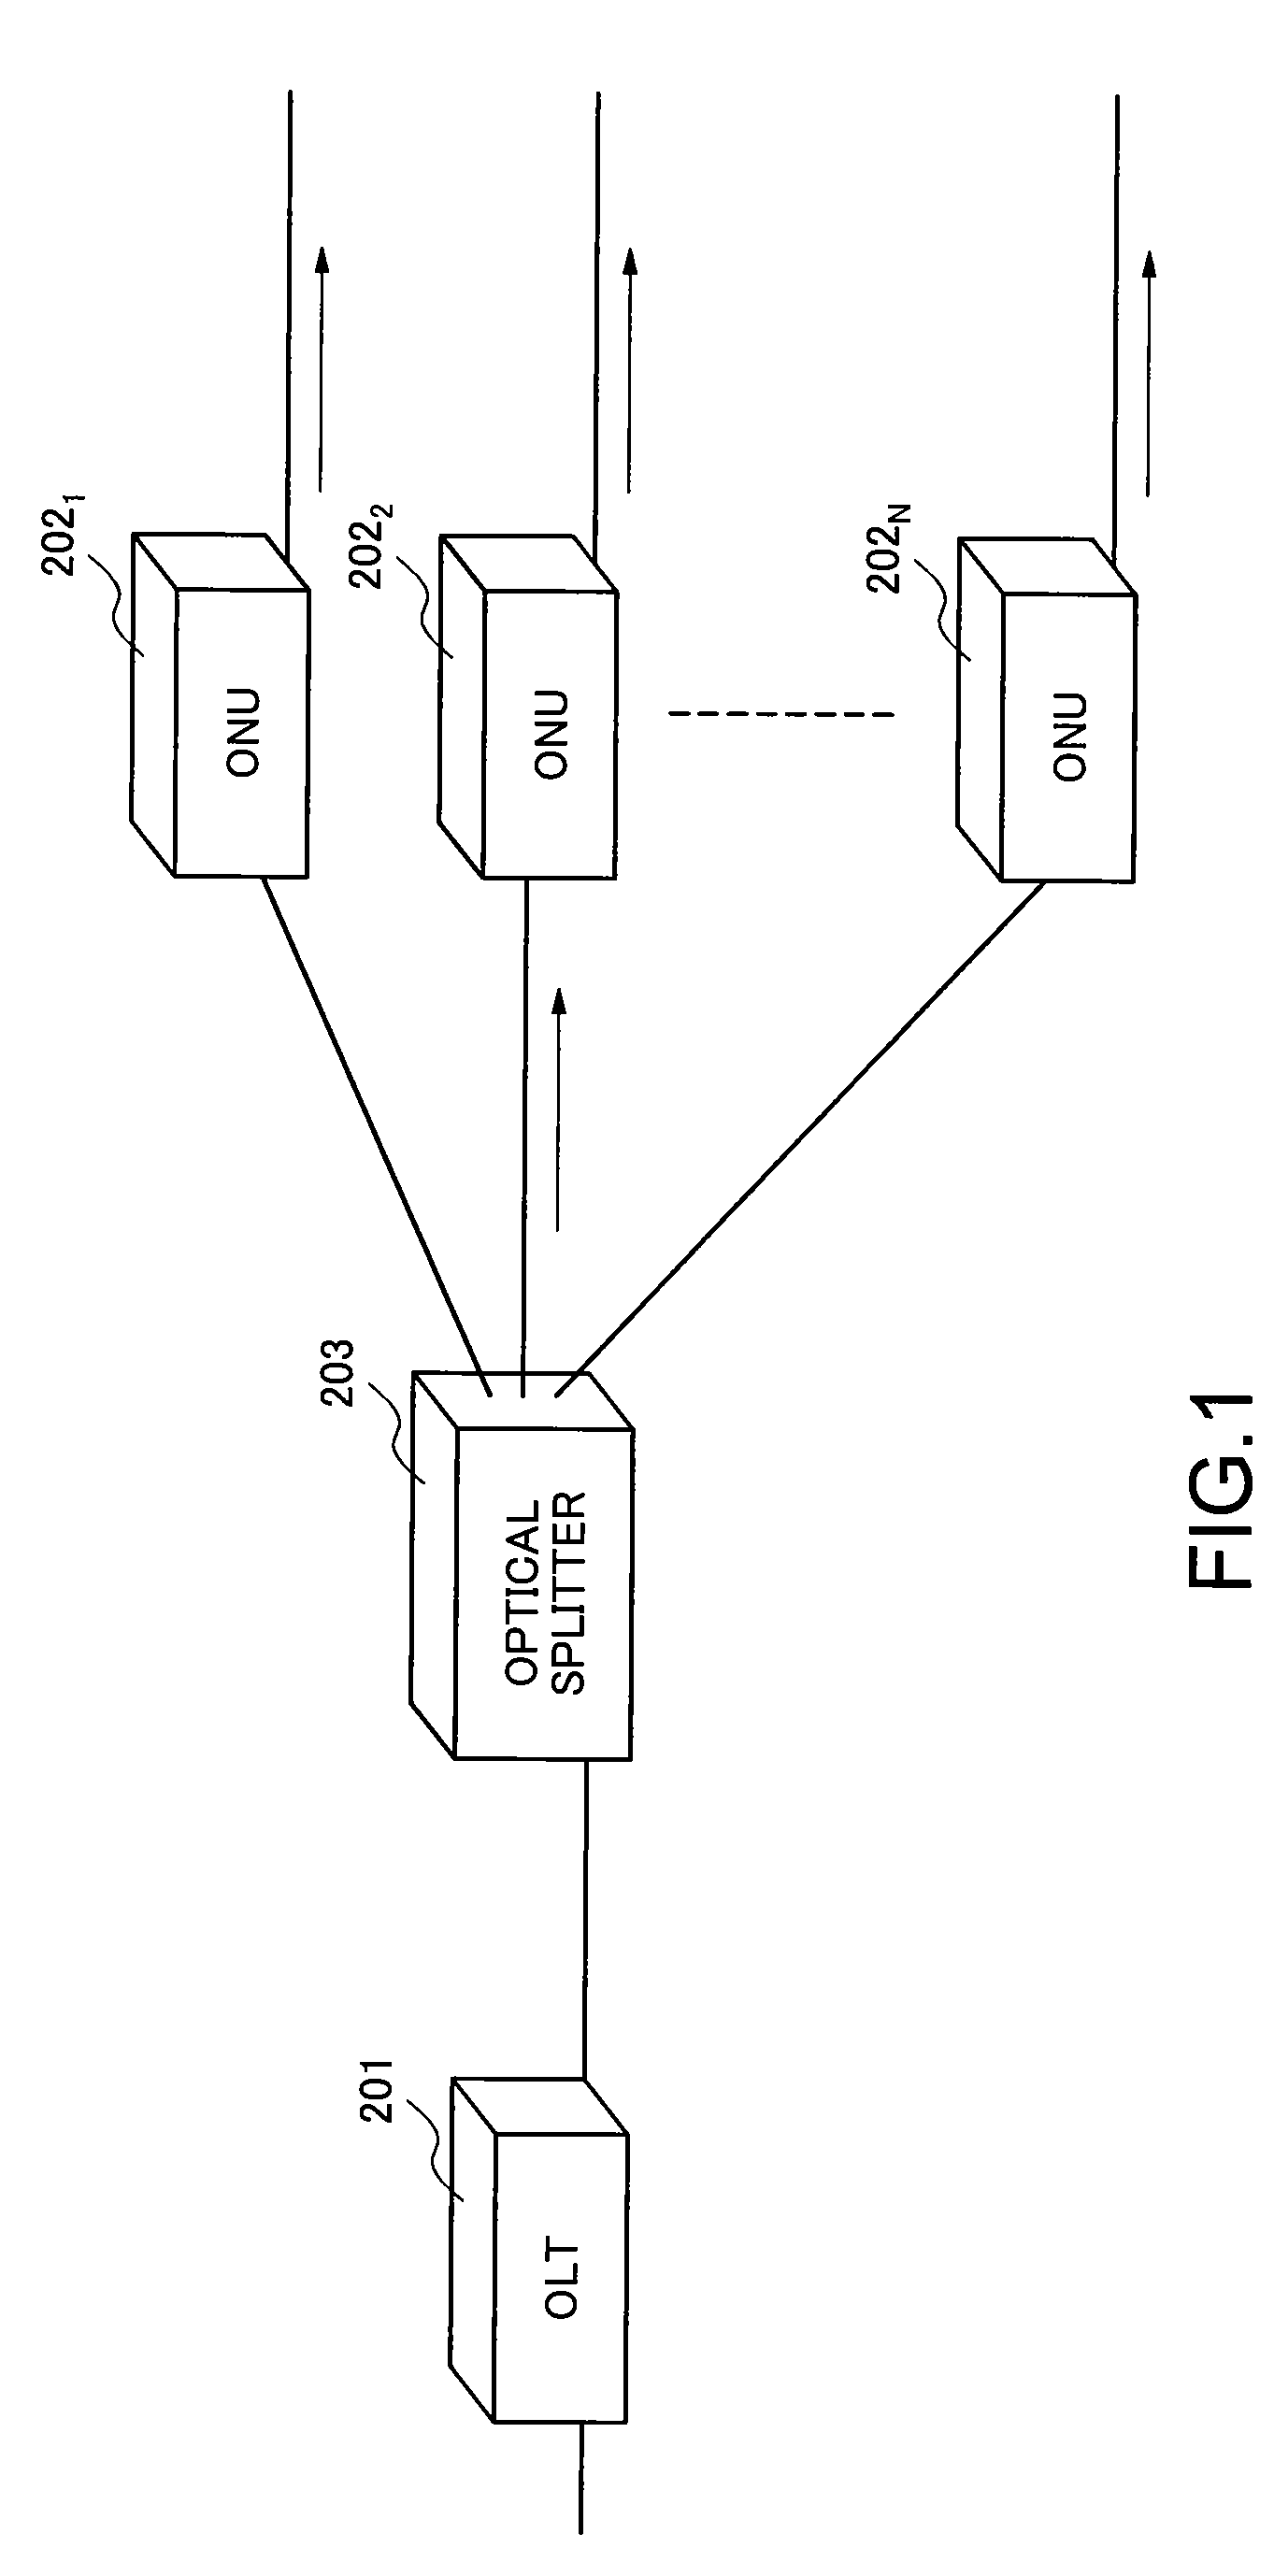 Equipment and method for band allocation